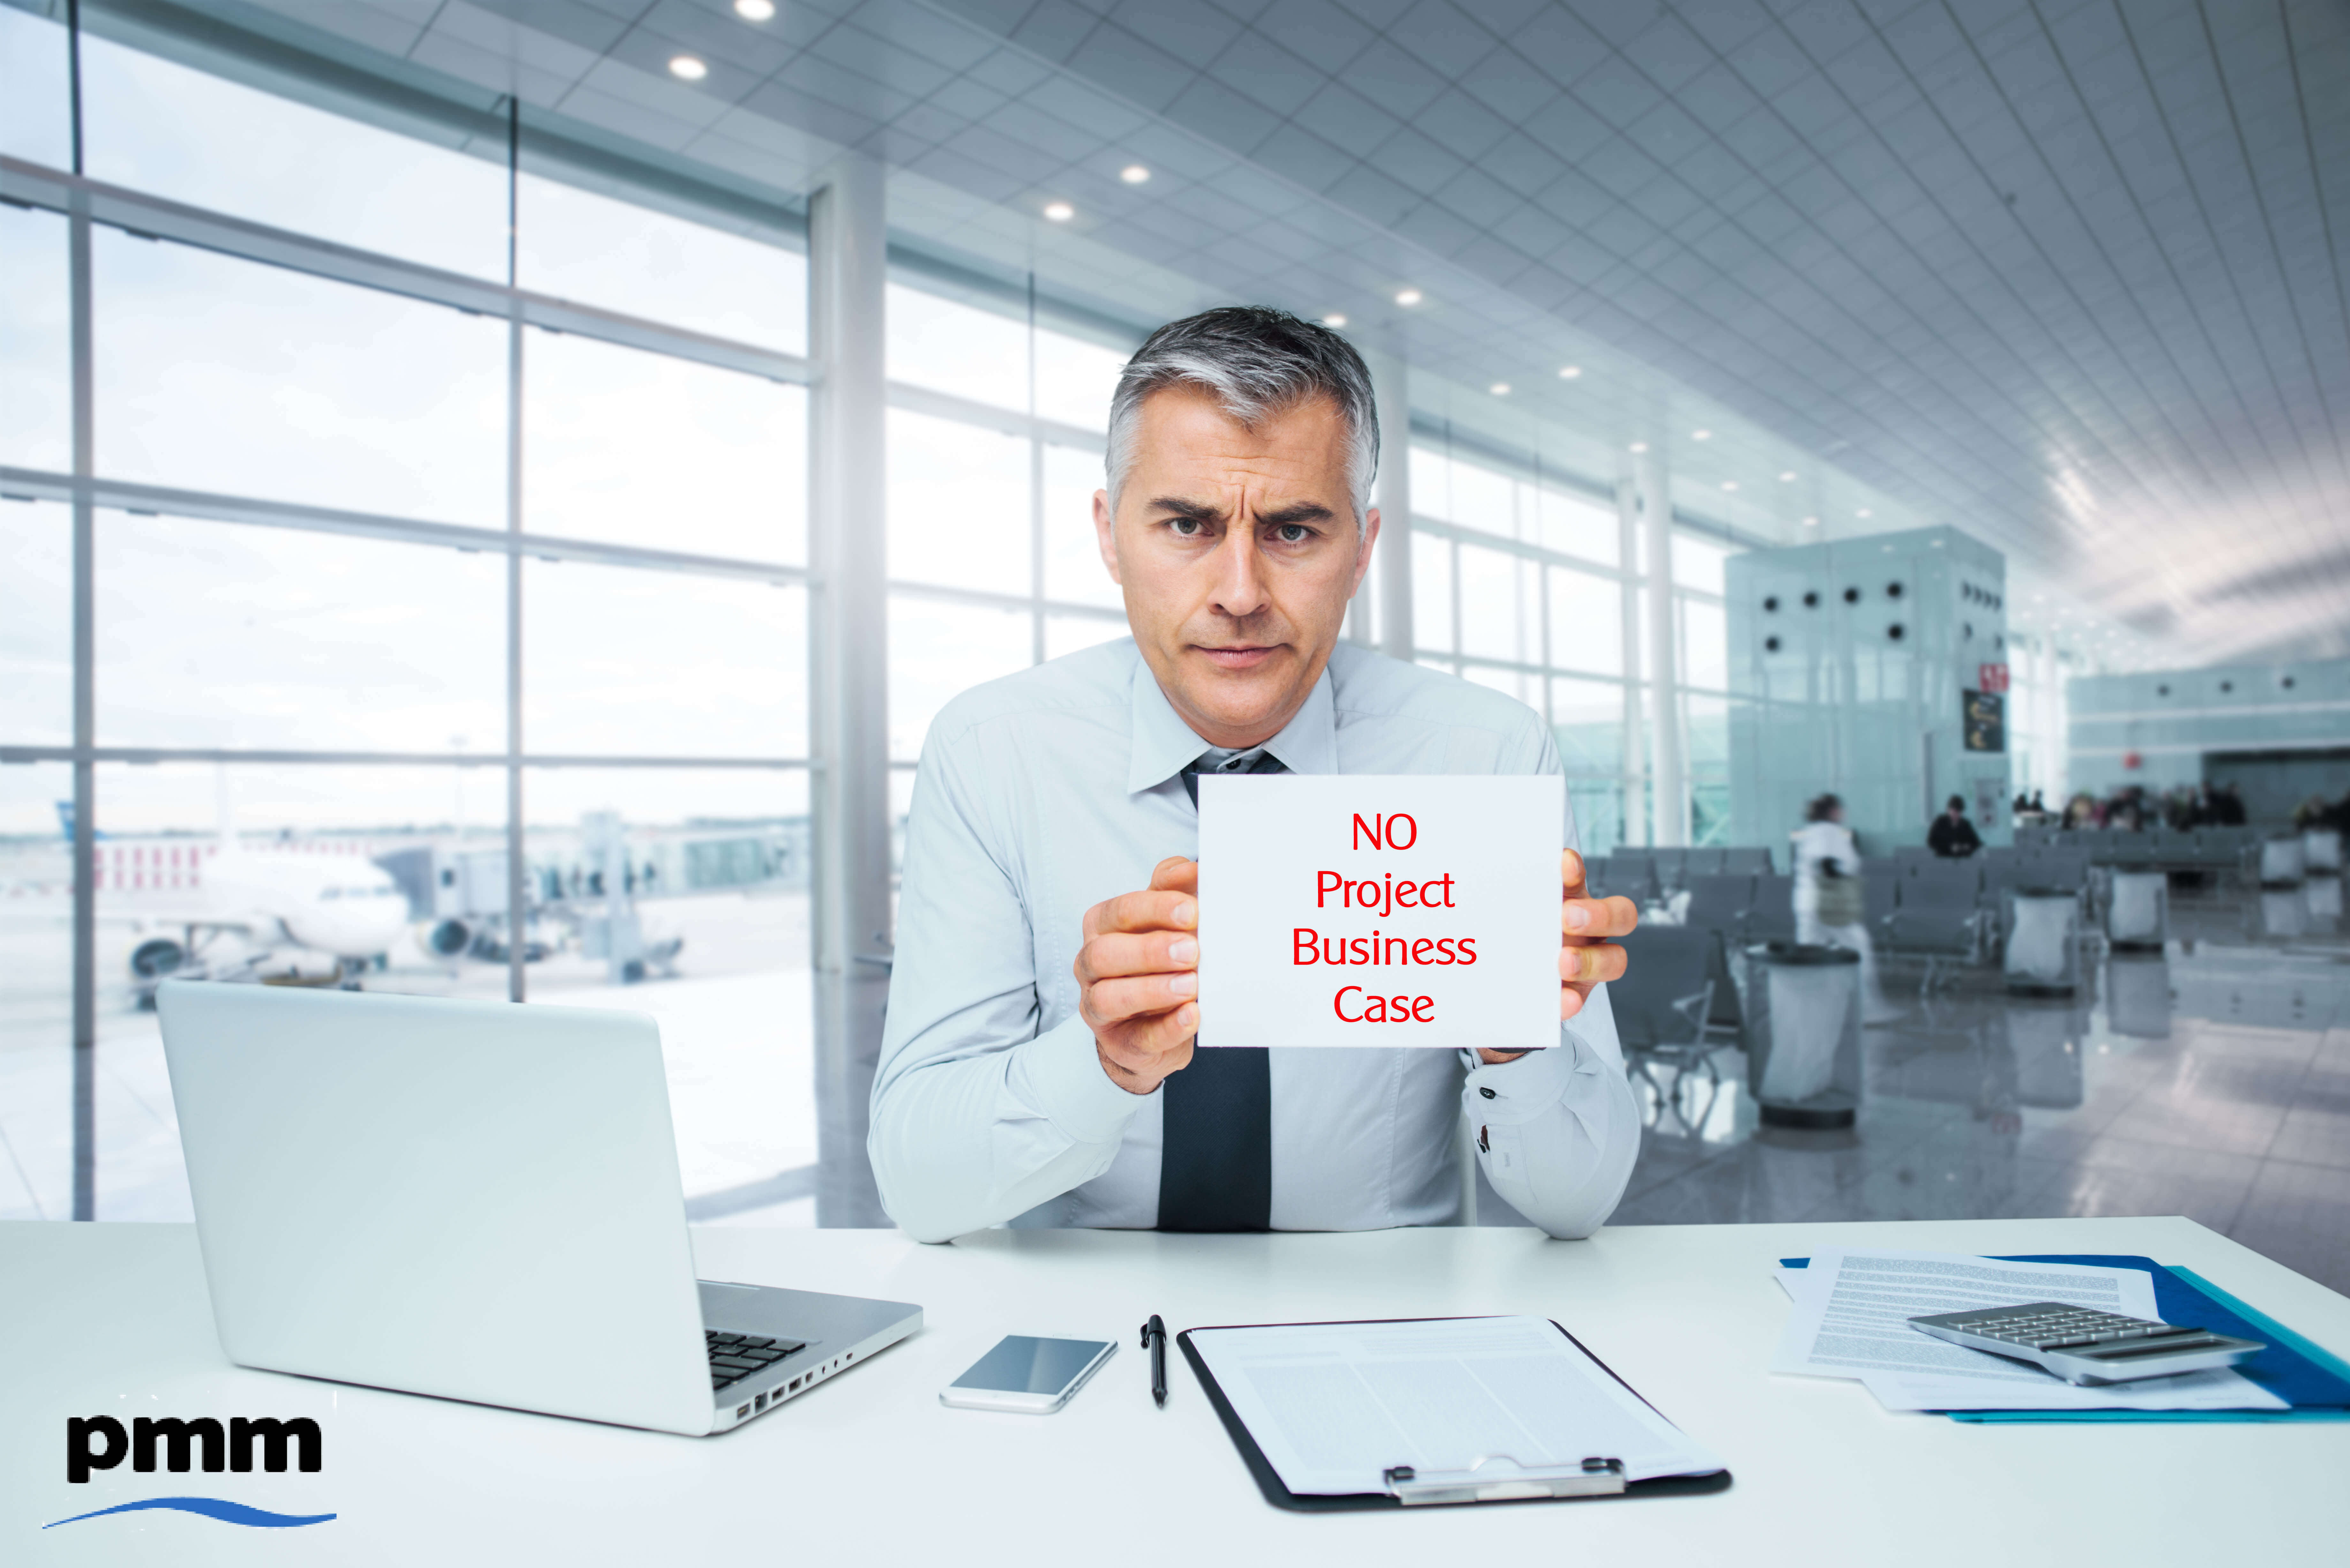 Sponsor saying no to a project business case